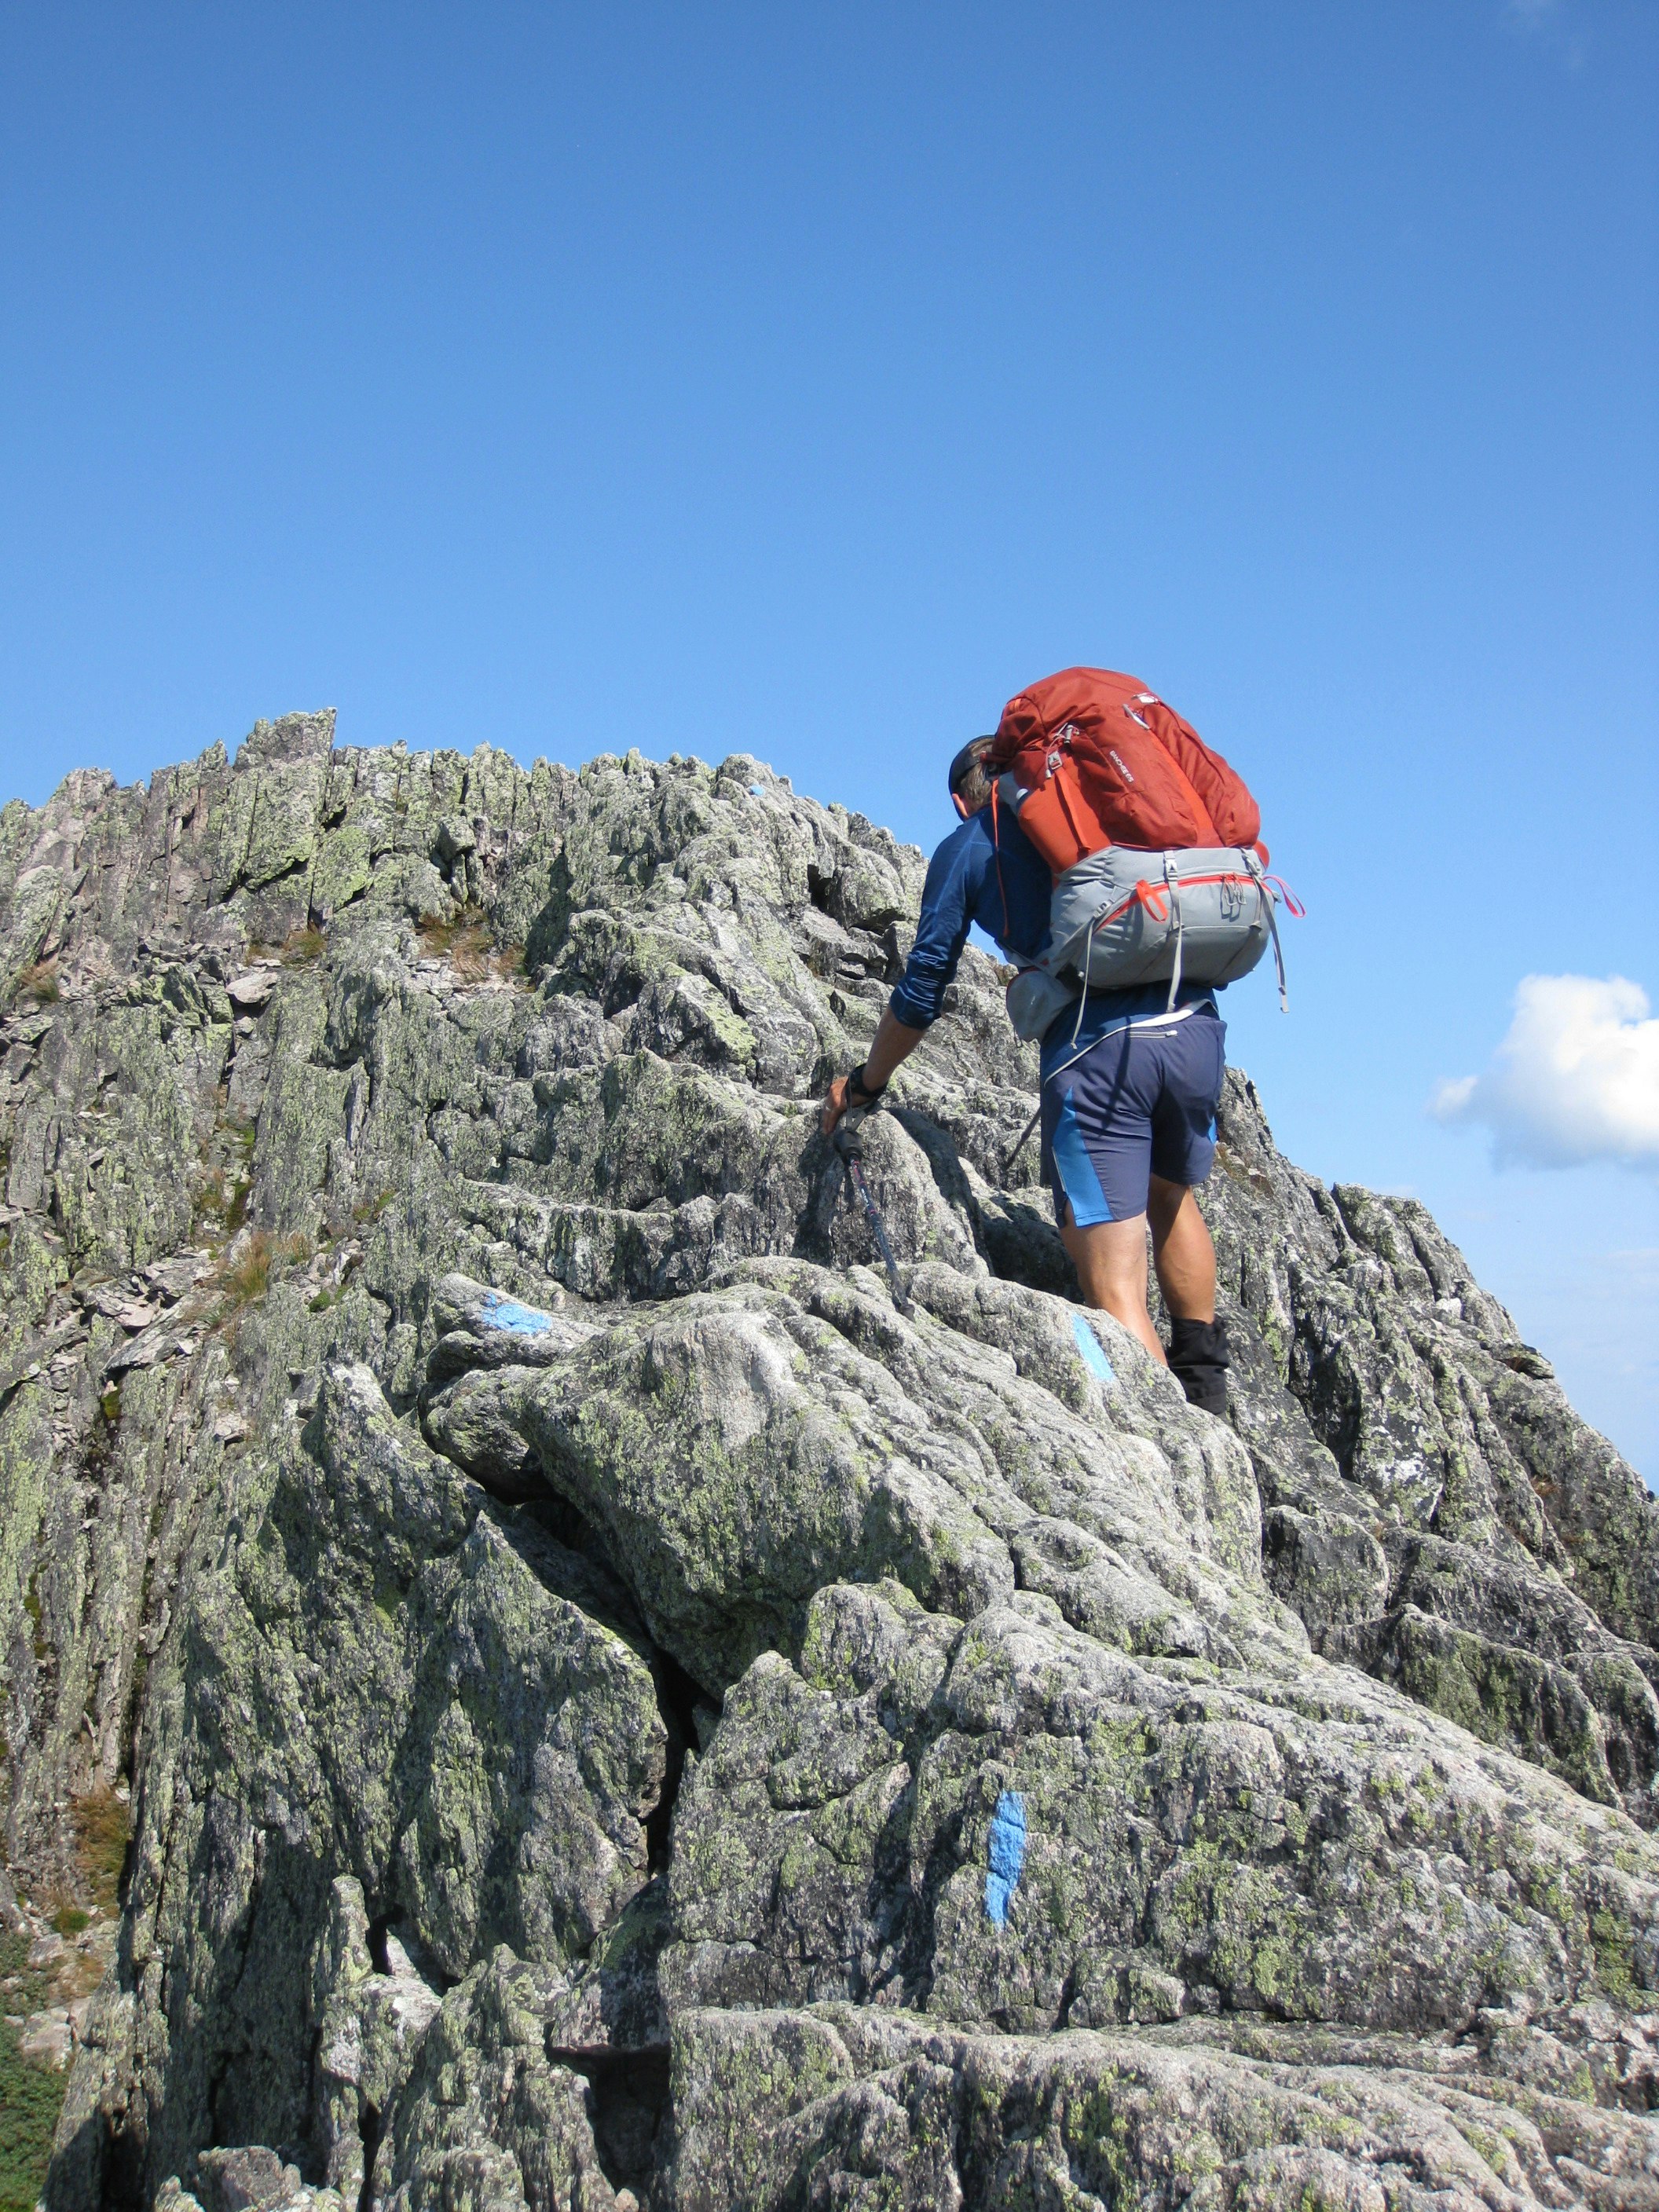 A man climbs down spiky rocks from the summit of Mount Katahdin in the Maine backwoods